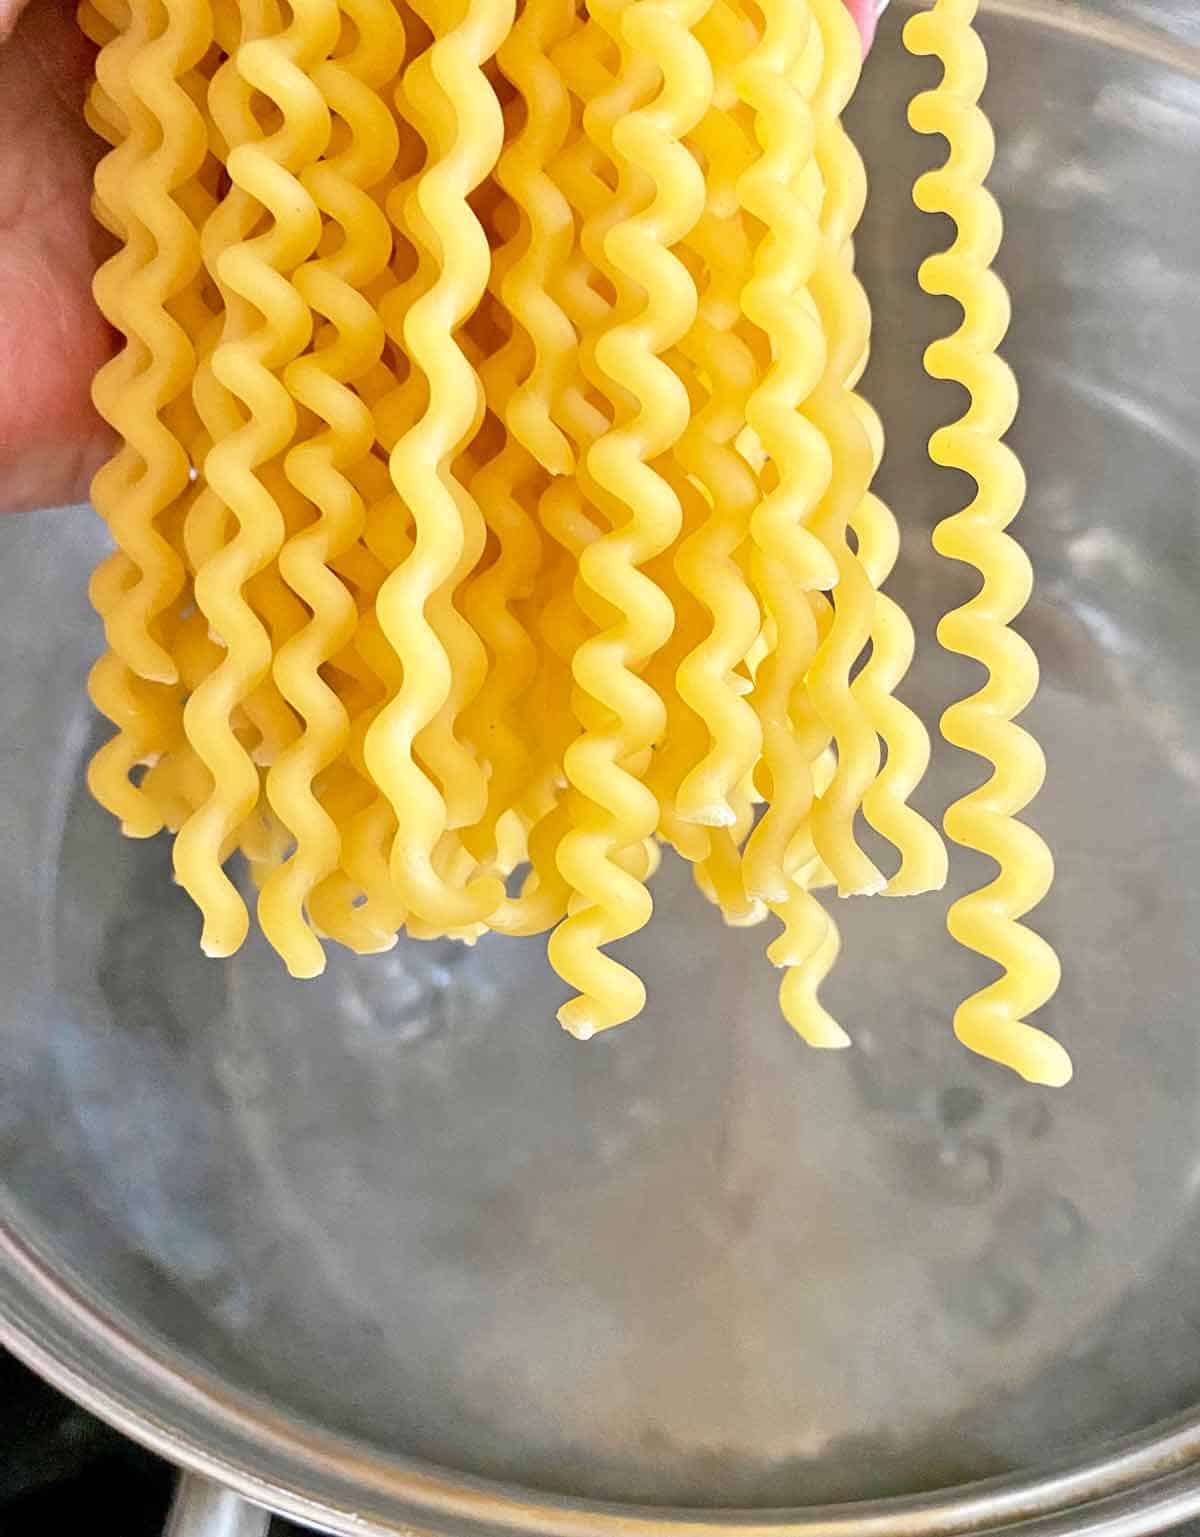 Adding dried pasta noodles to a pot of boiling water.